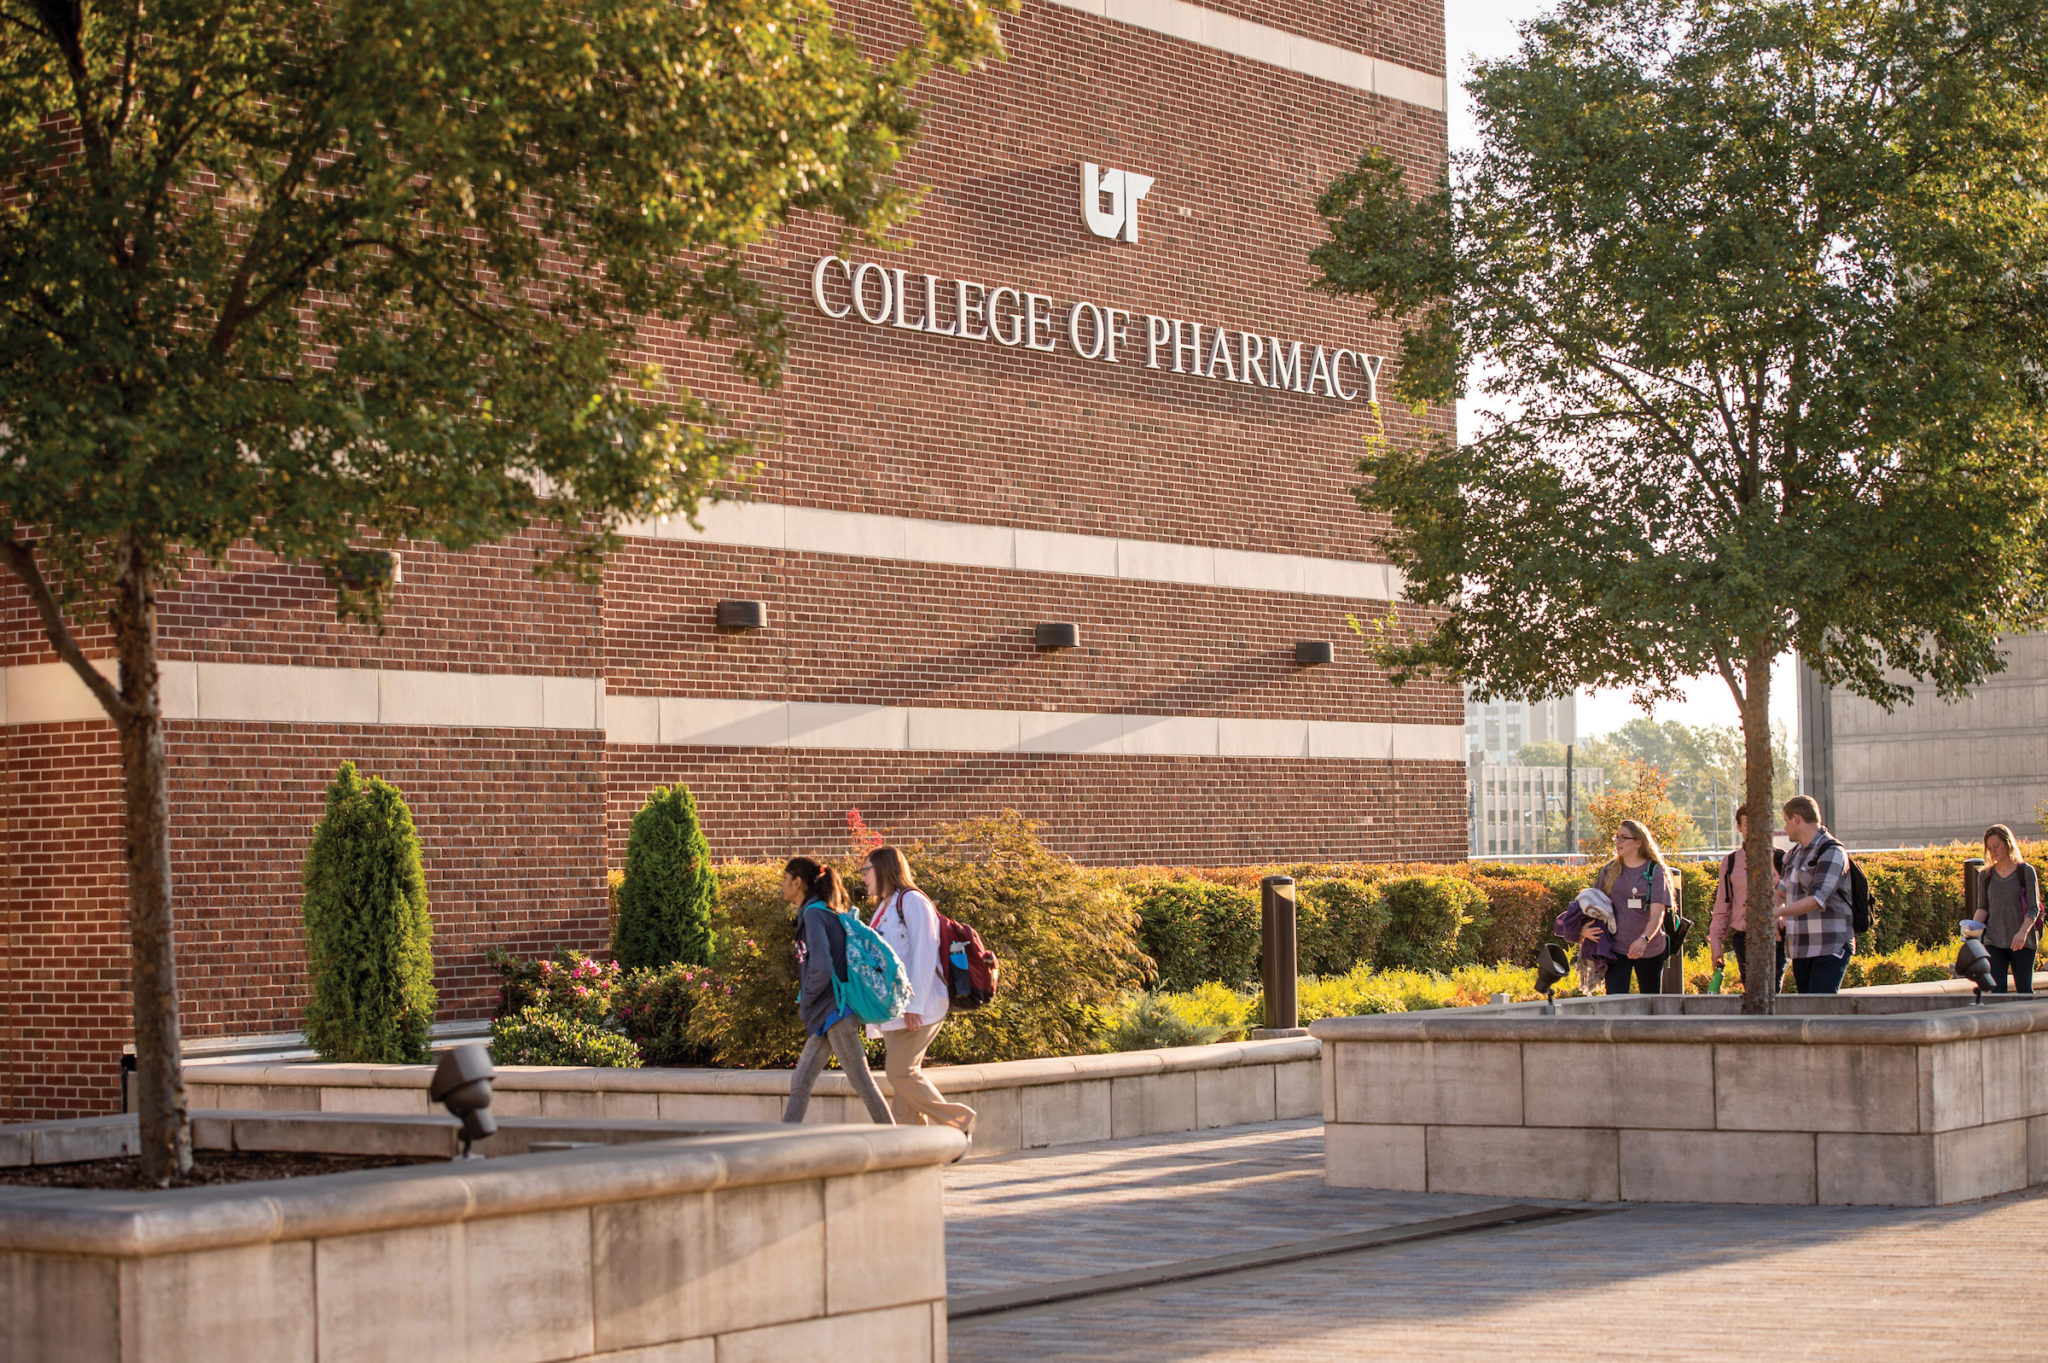 Two students walk by the College of Pharmacy building in Memphis, Tennessee